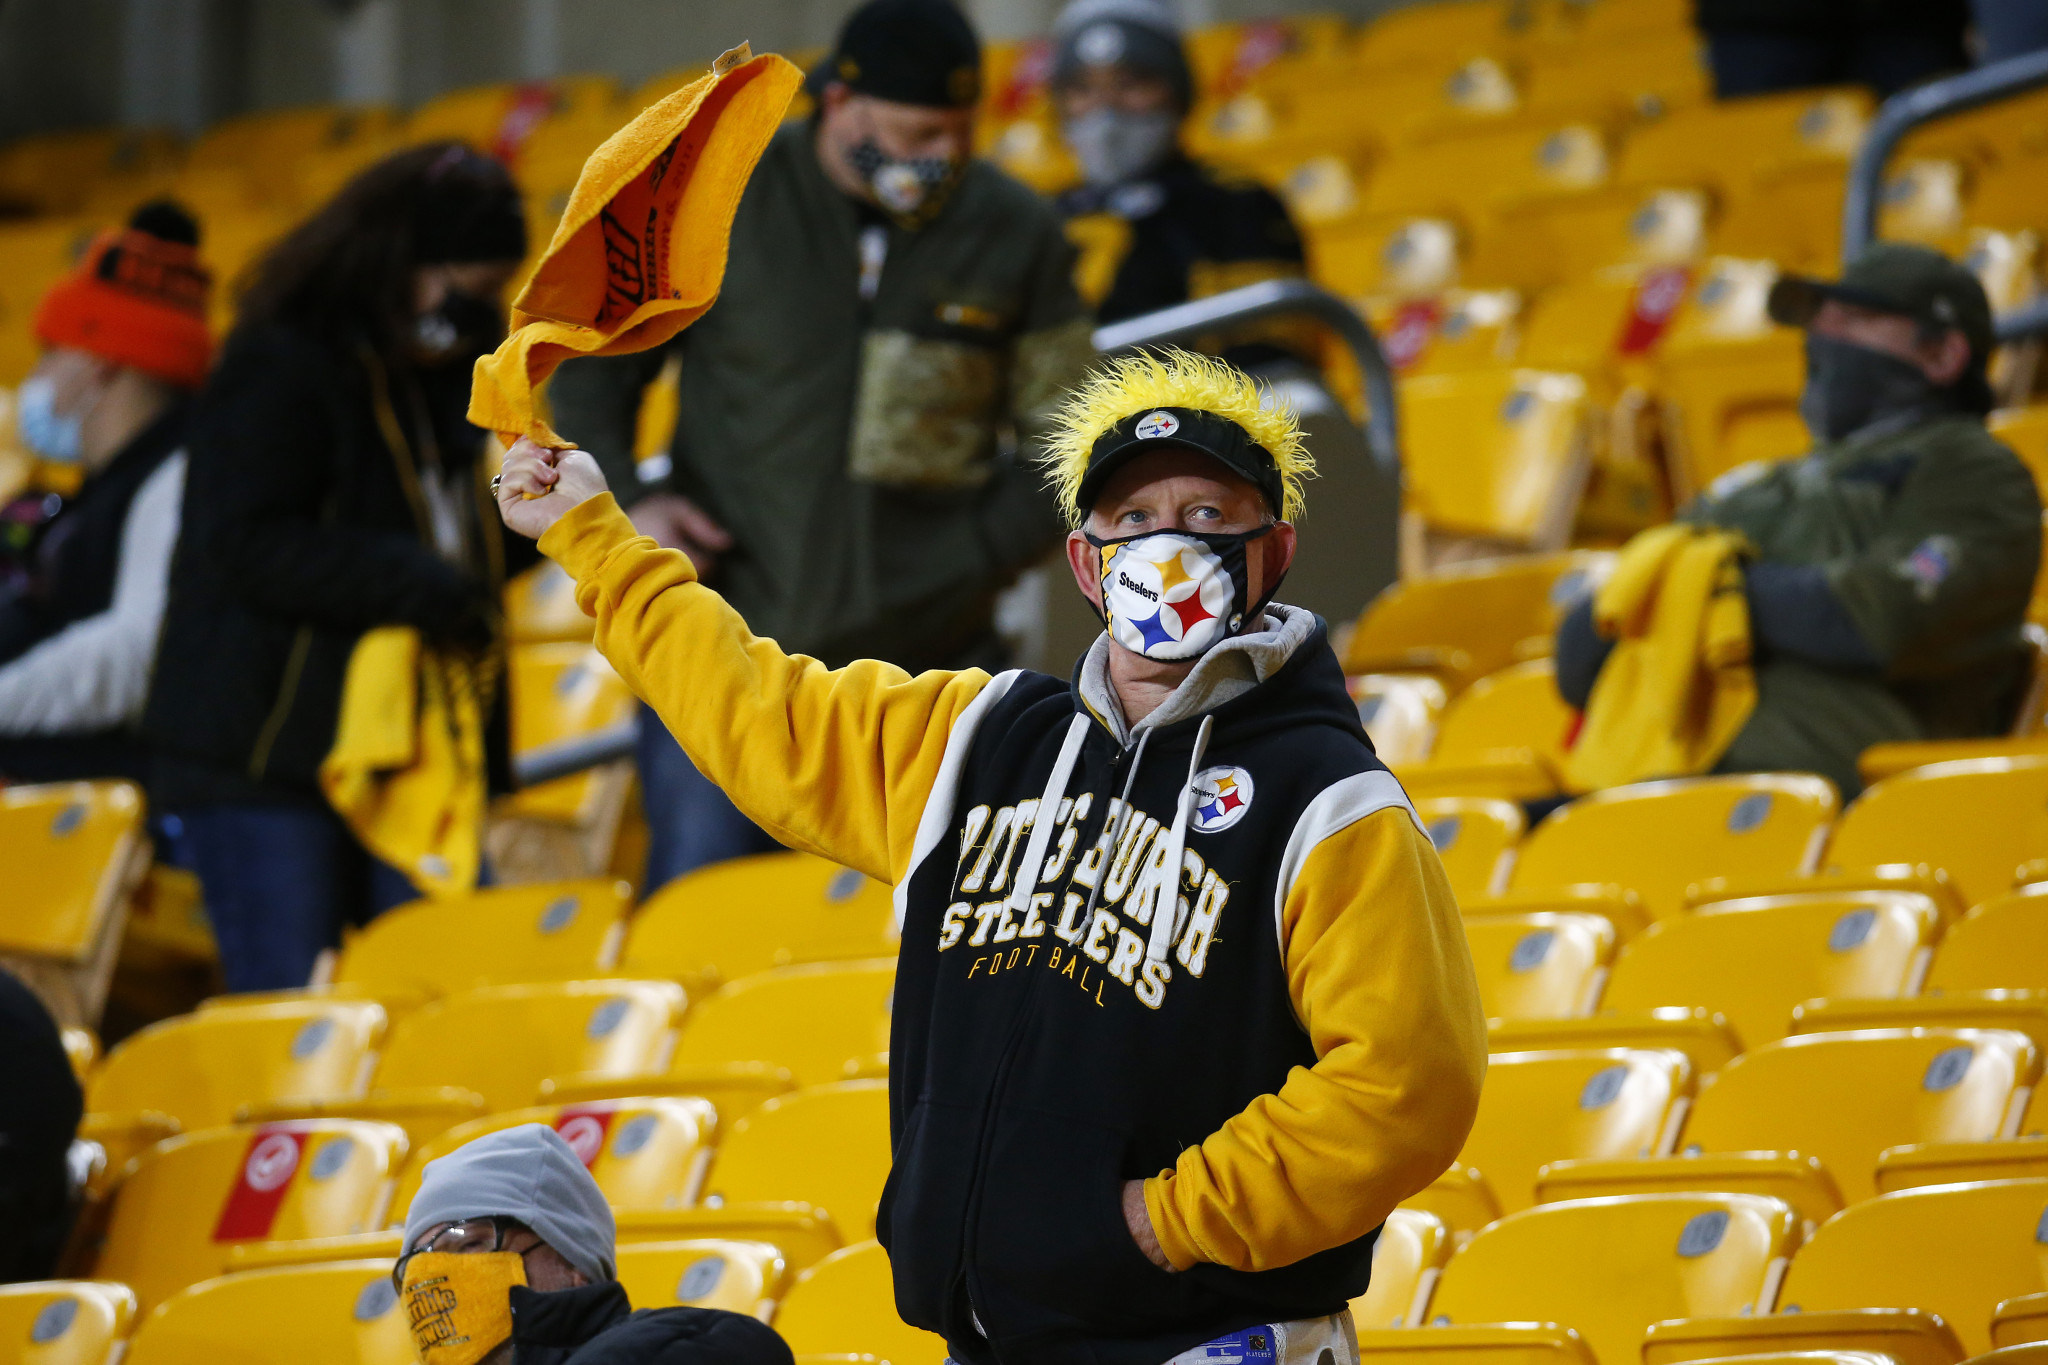 Pittsburgh Steelers' fans were allowed to attend their National Football League match against their main rivals Cincinnati Bengals earlier this month ©Getty Images